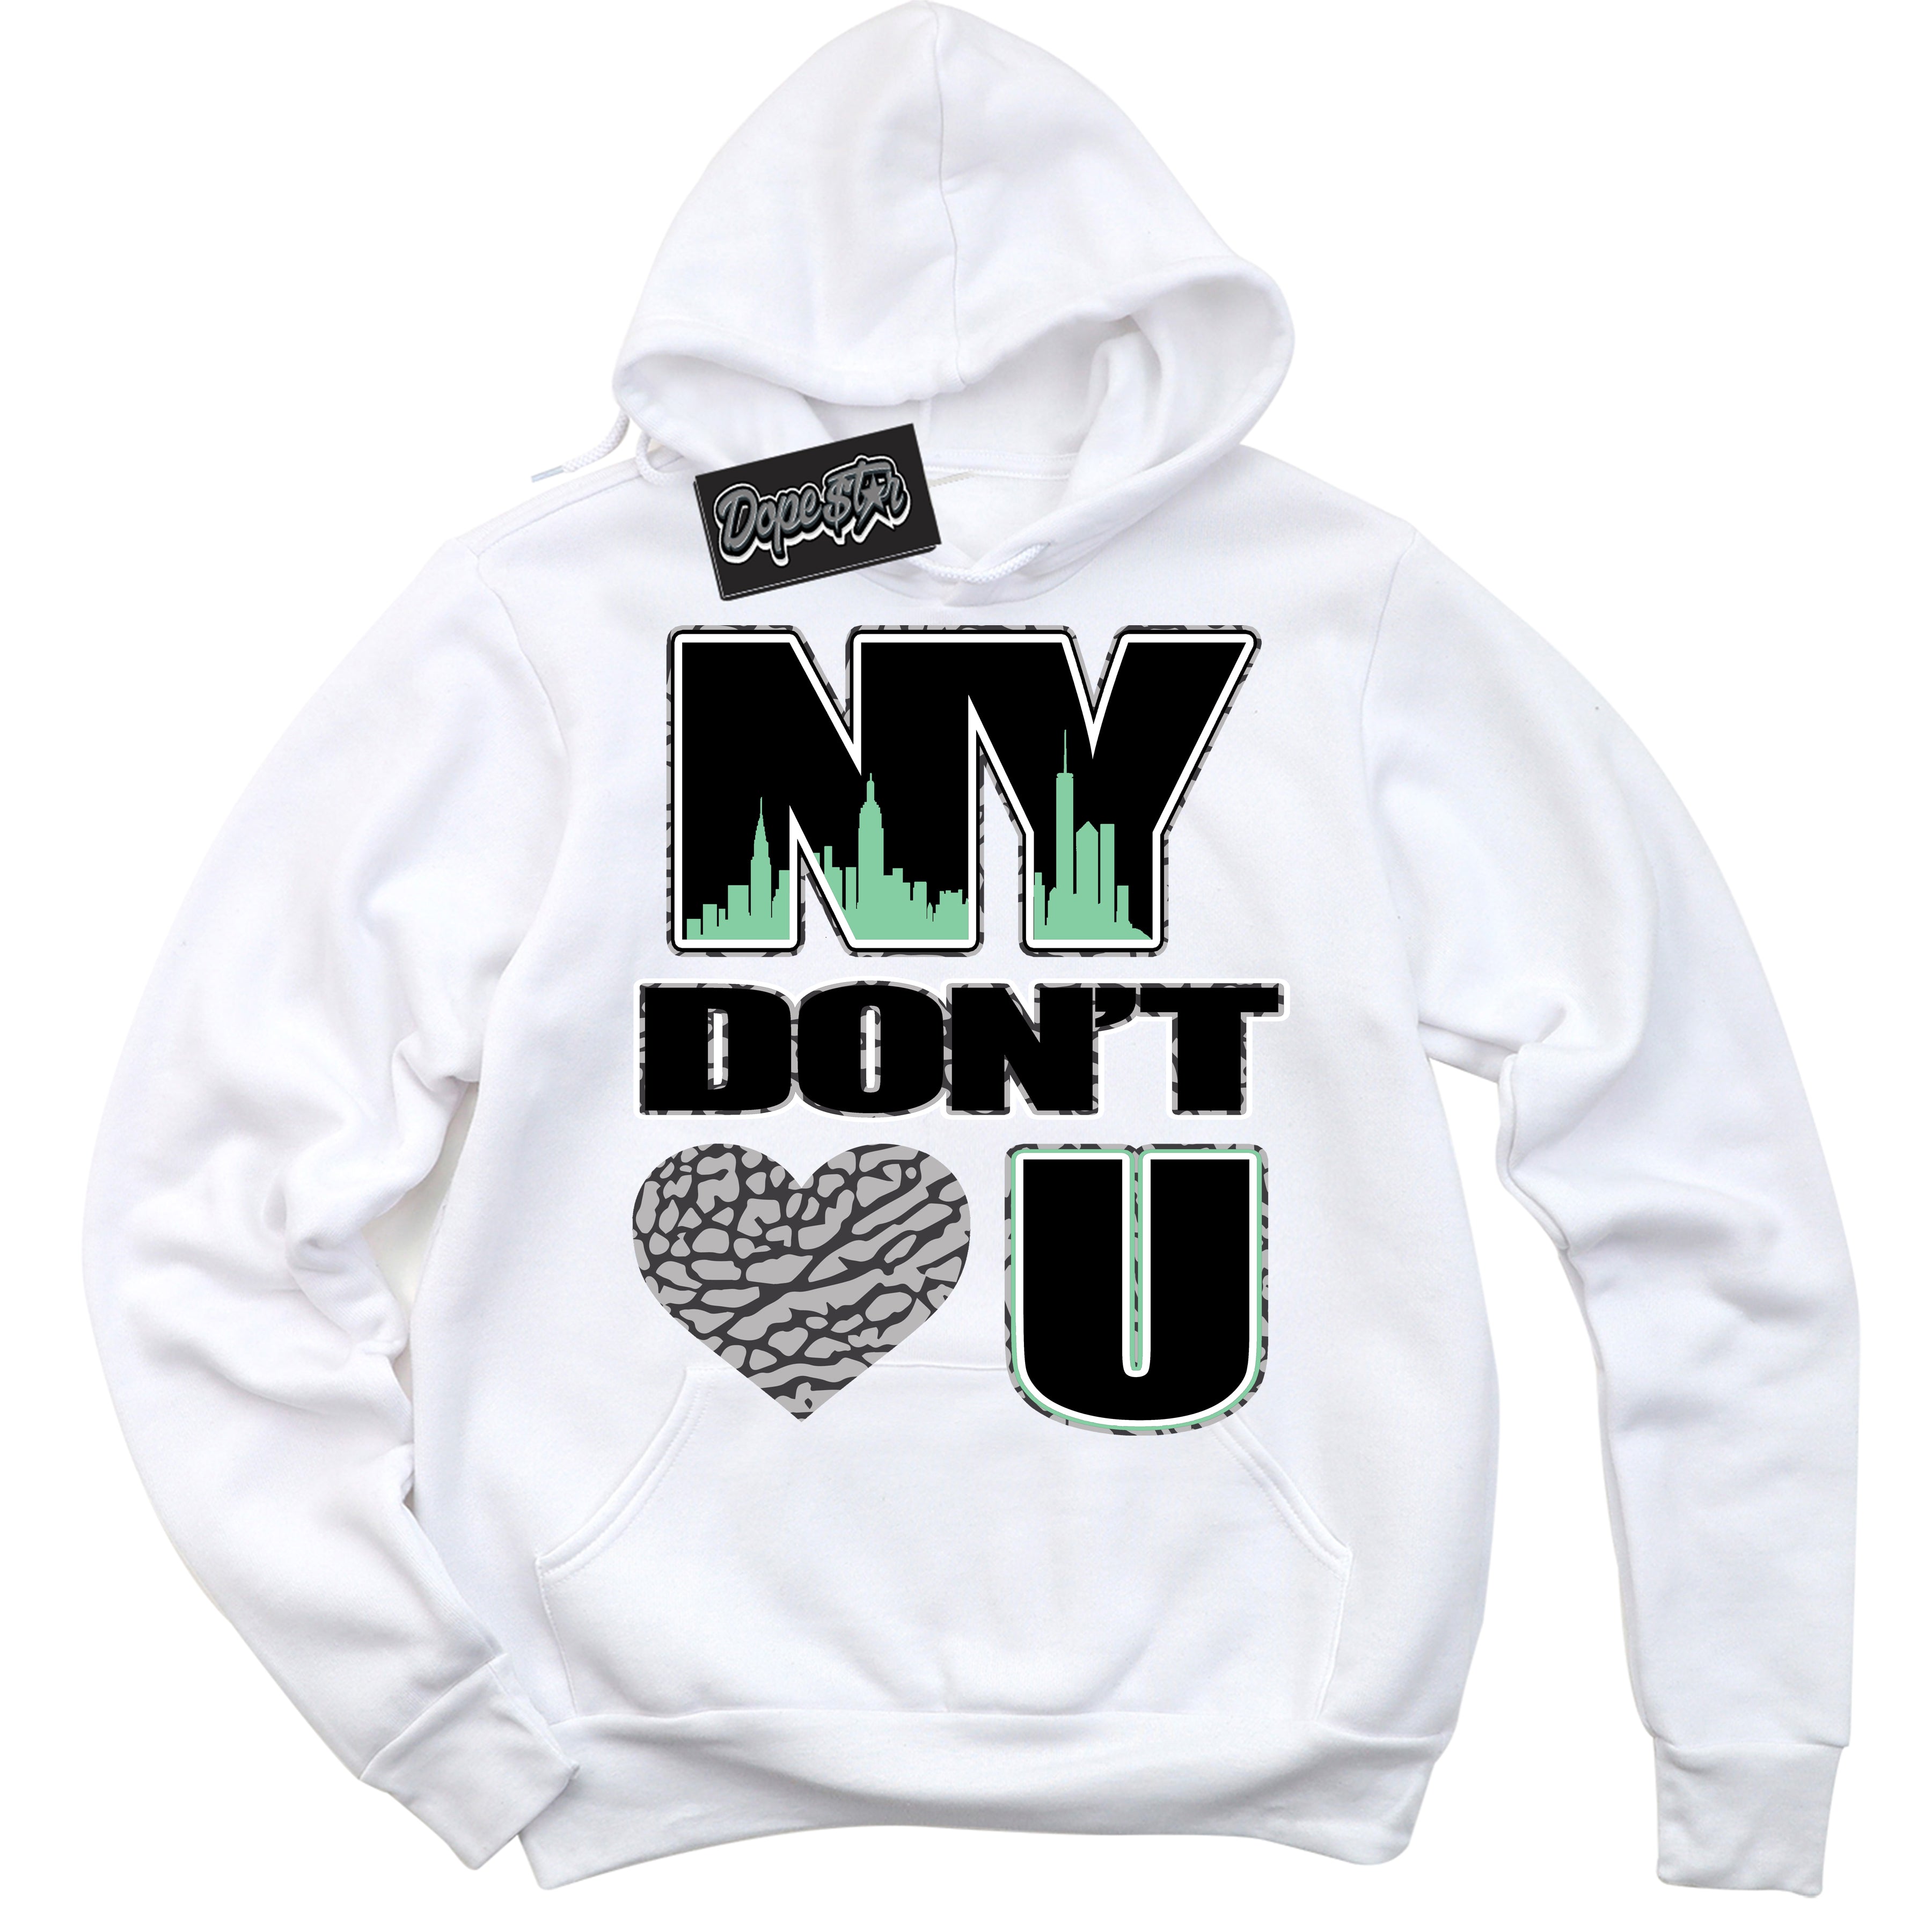 Cool White Graphic DopeStar Hoodie with “ NY Don't Love You “ print, that perfectly matches Green Glow 3s sneakers